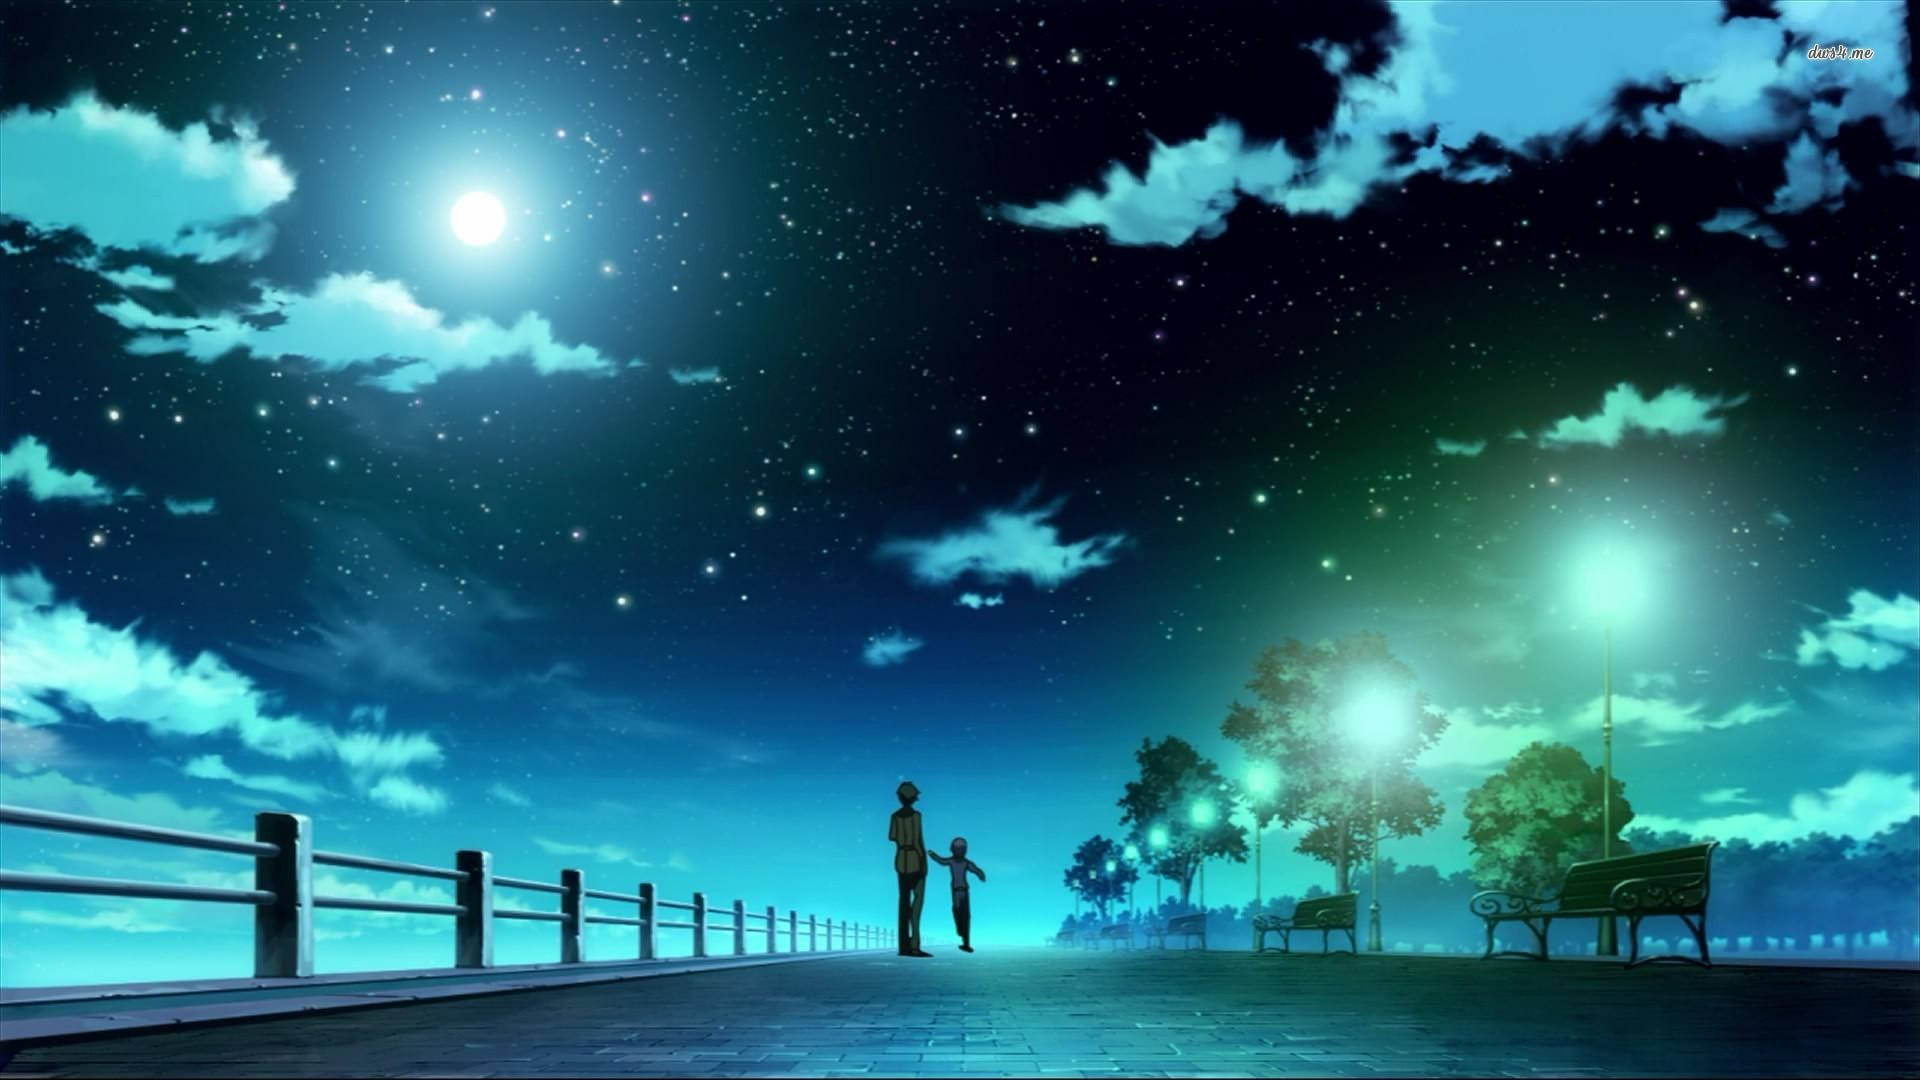 Download Anime Night Sky And Park Wallpaper 